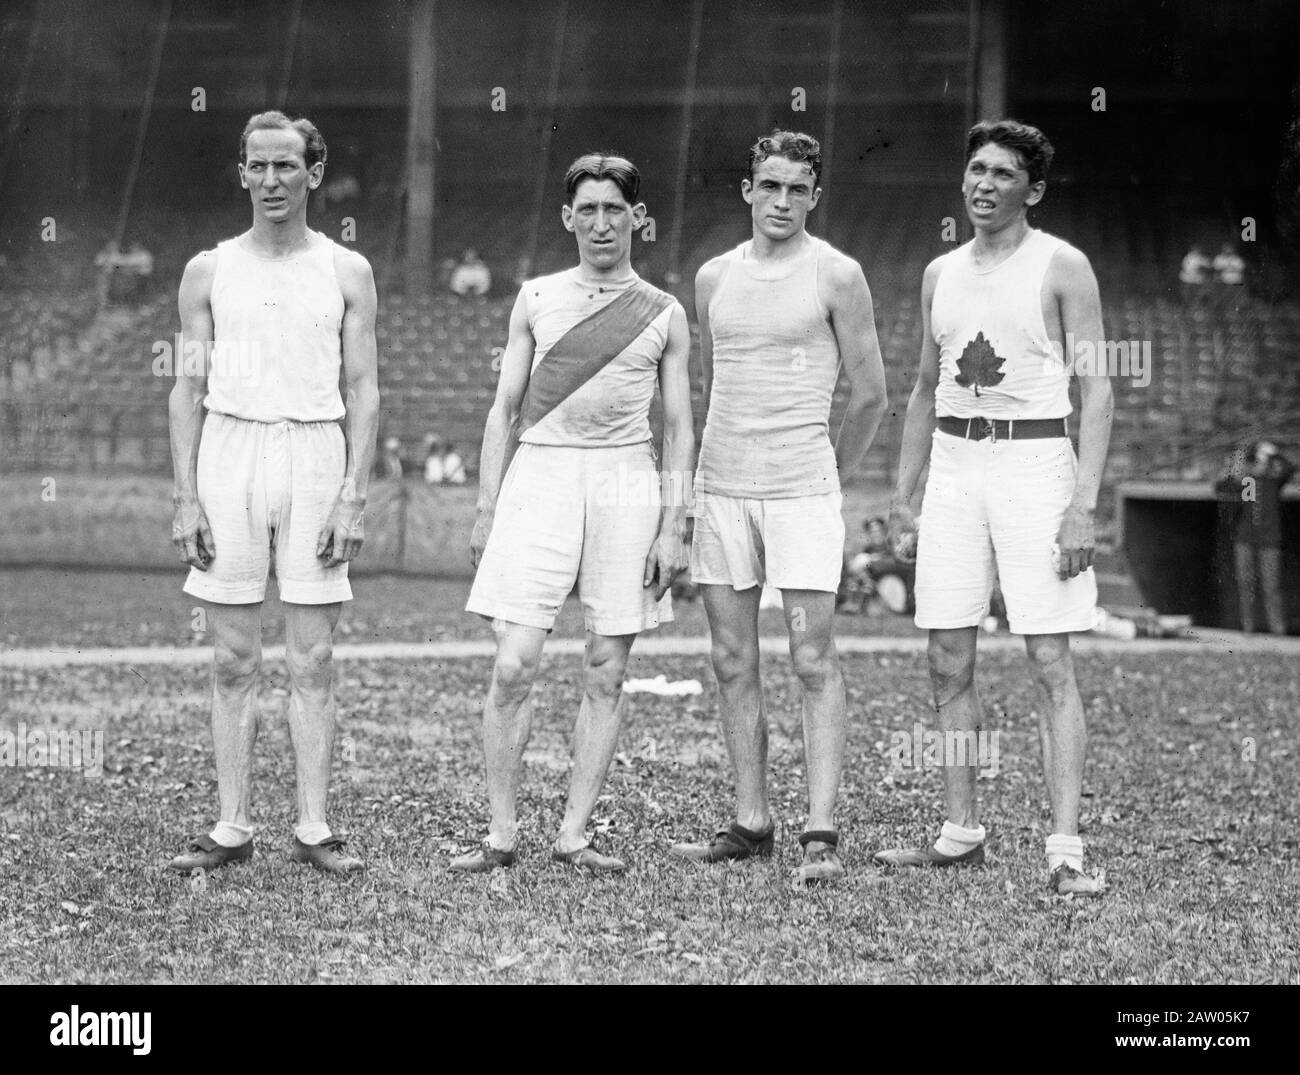 Photograph shows Canadian runners Tom Longboat, Abbie Wood and A. Meadows with American runner Bill Queal. The men participated in a sports exhibition at Ebbets Field, Brooklyn, New York City on July 26, 1913. Stock Photo